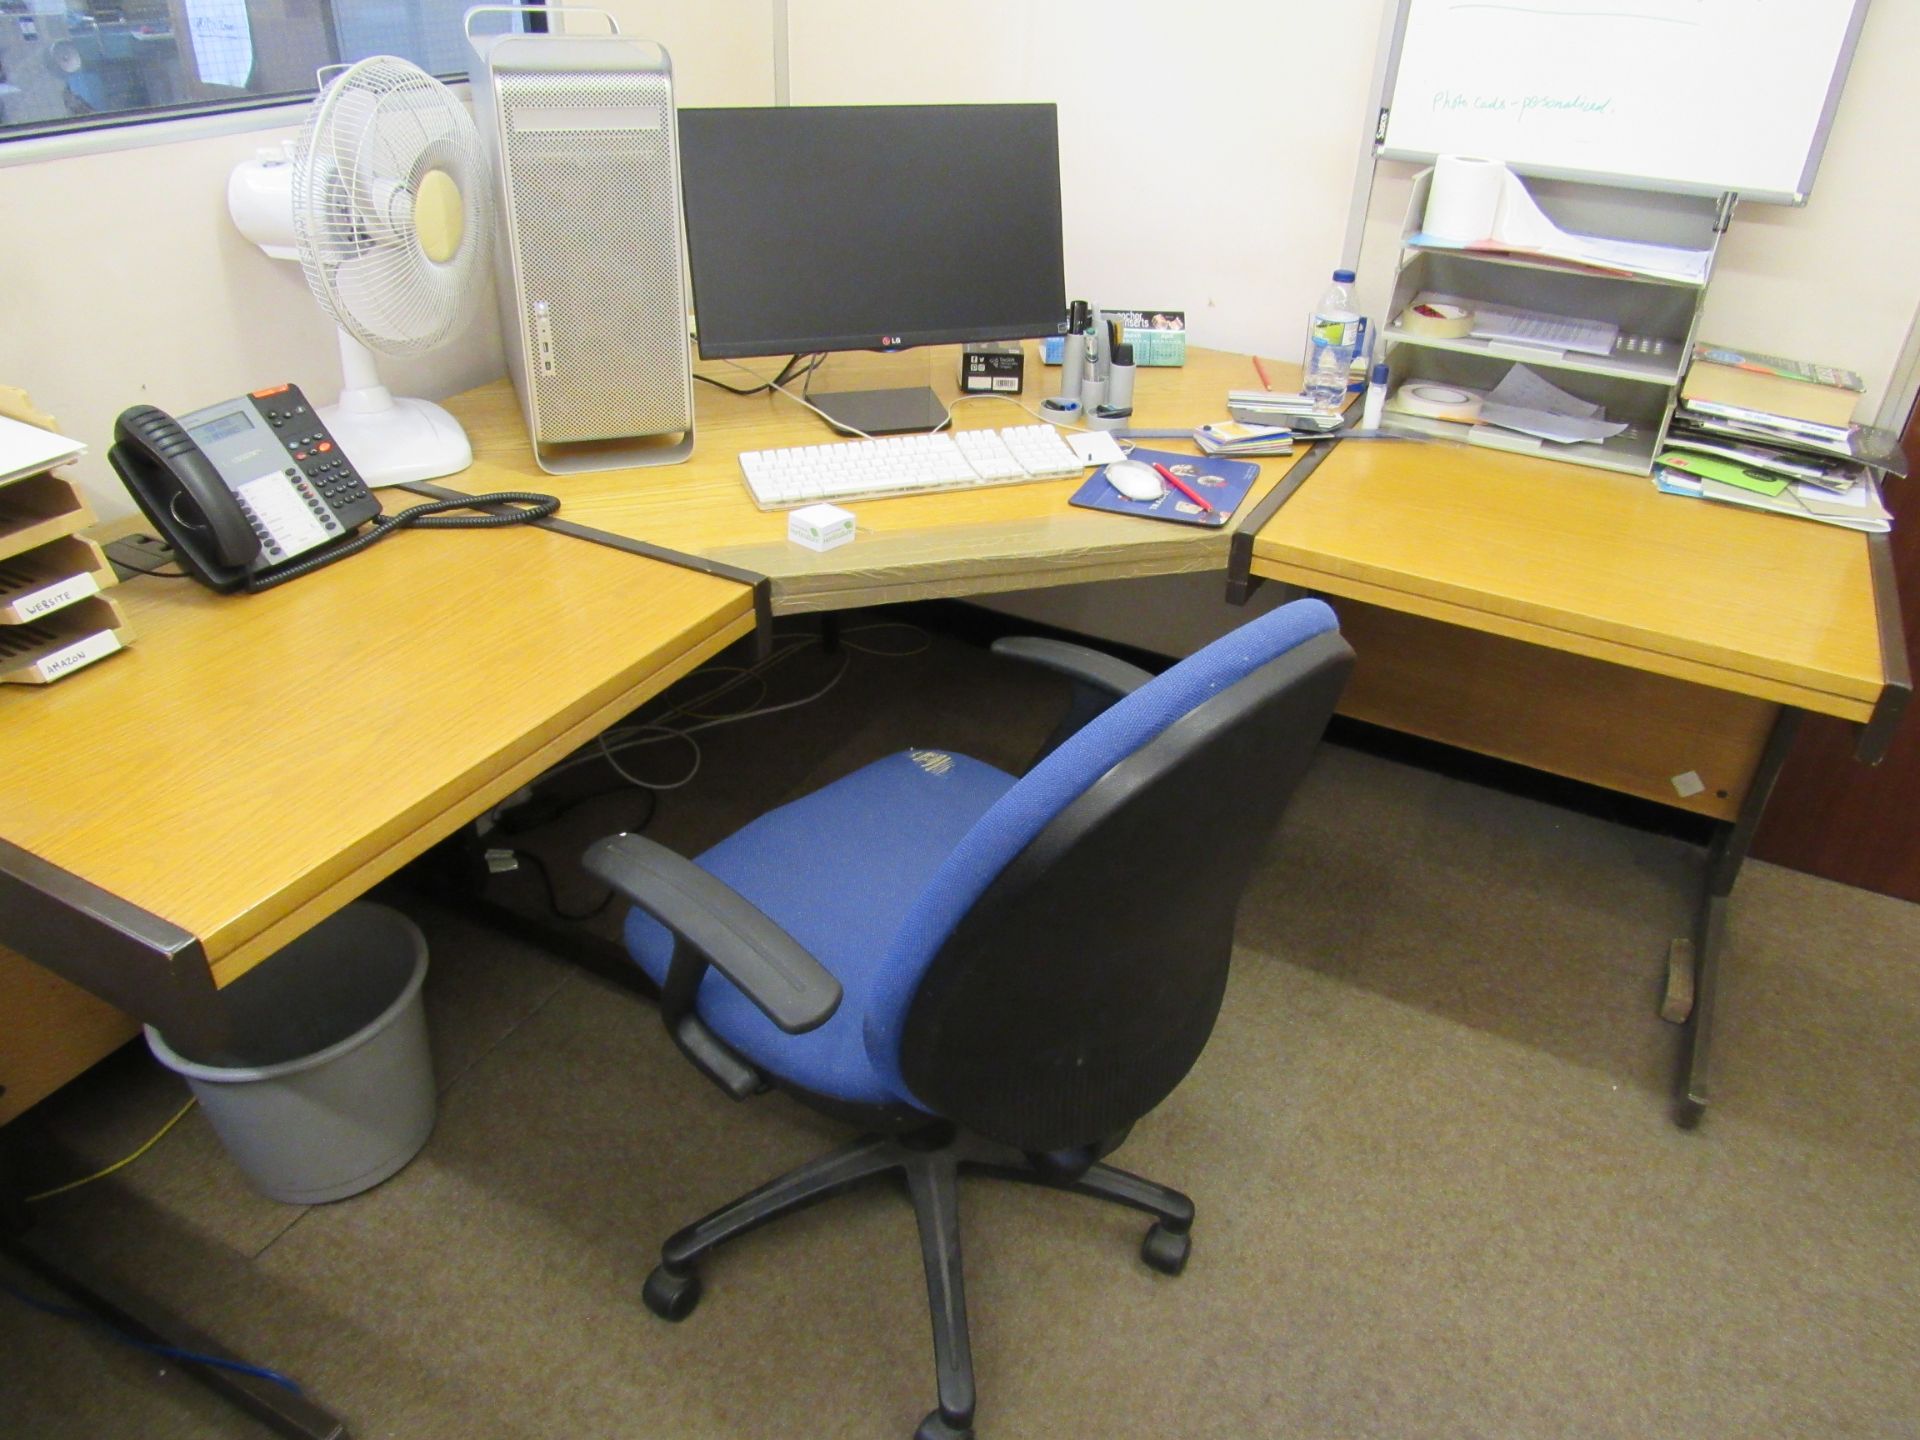 Various Office Furniture to Room - Image 2 of 2